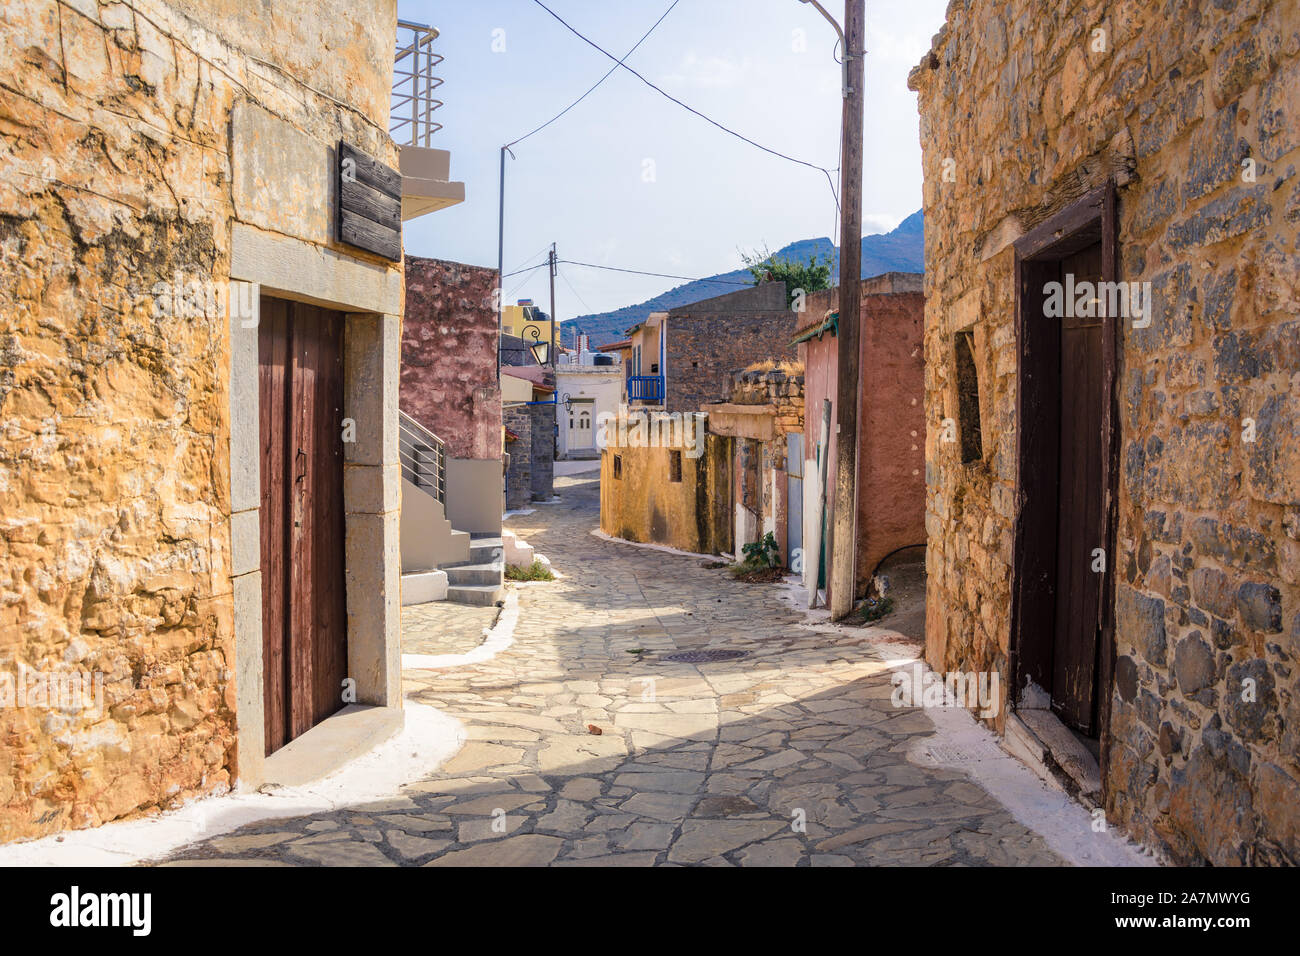 Narrow street with colorful stone houses in the old village of Pano Elounda, Crete, Greece. Stock Photo